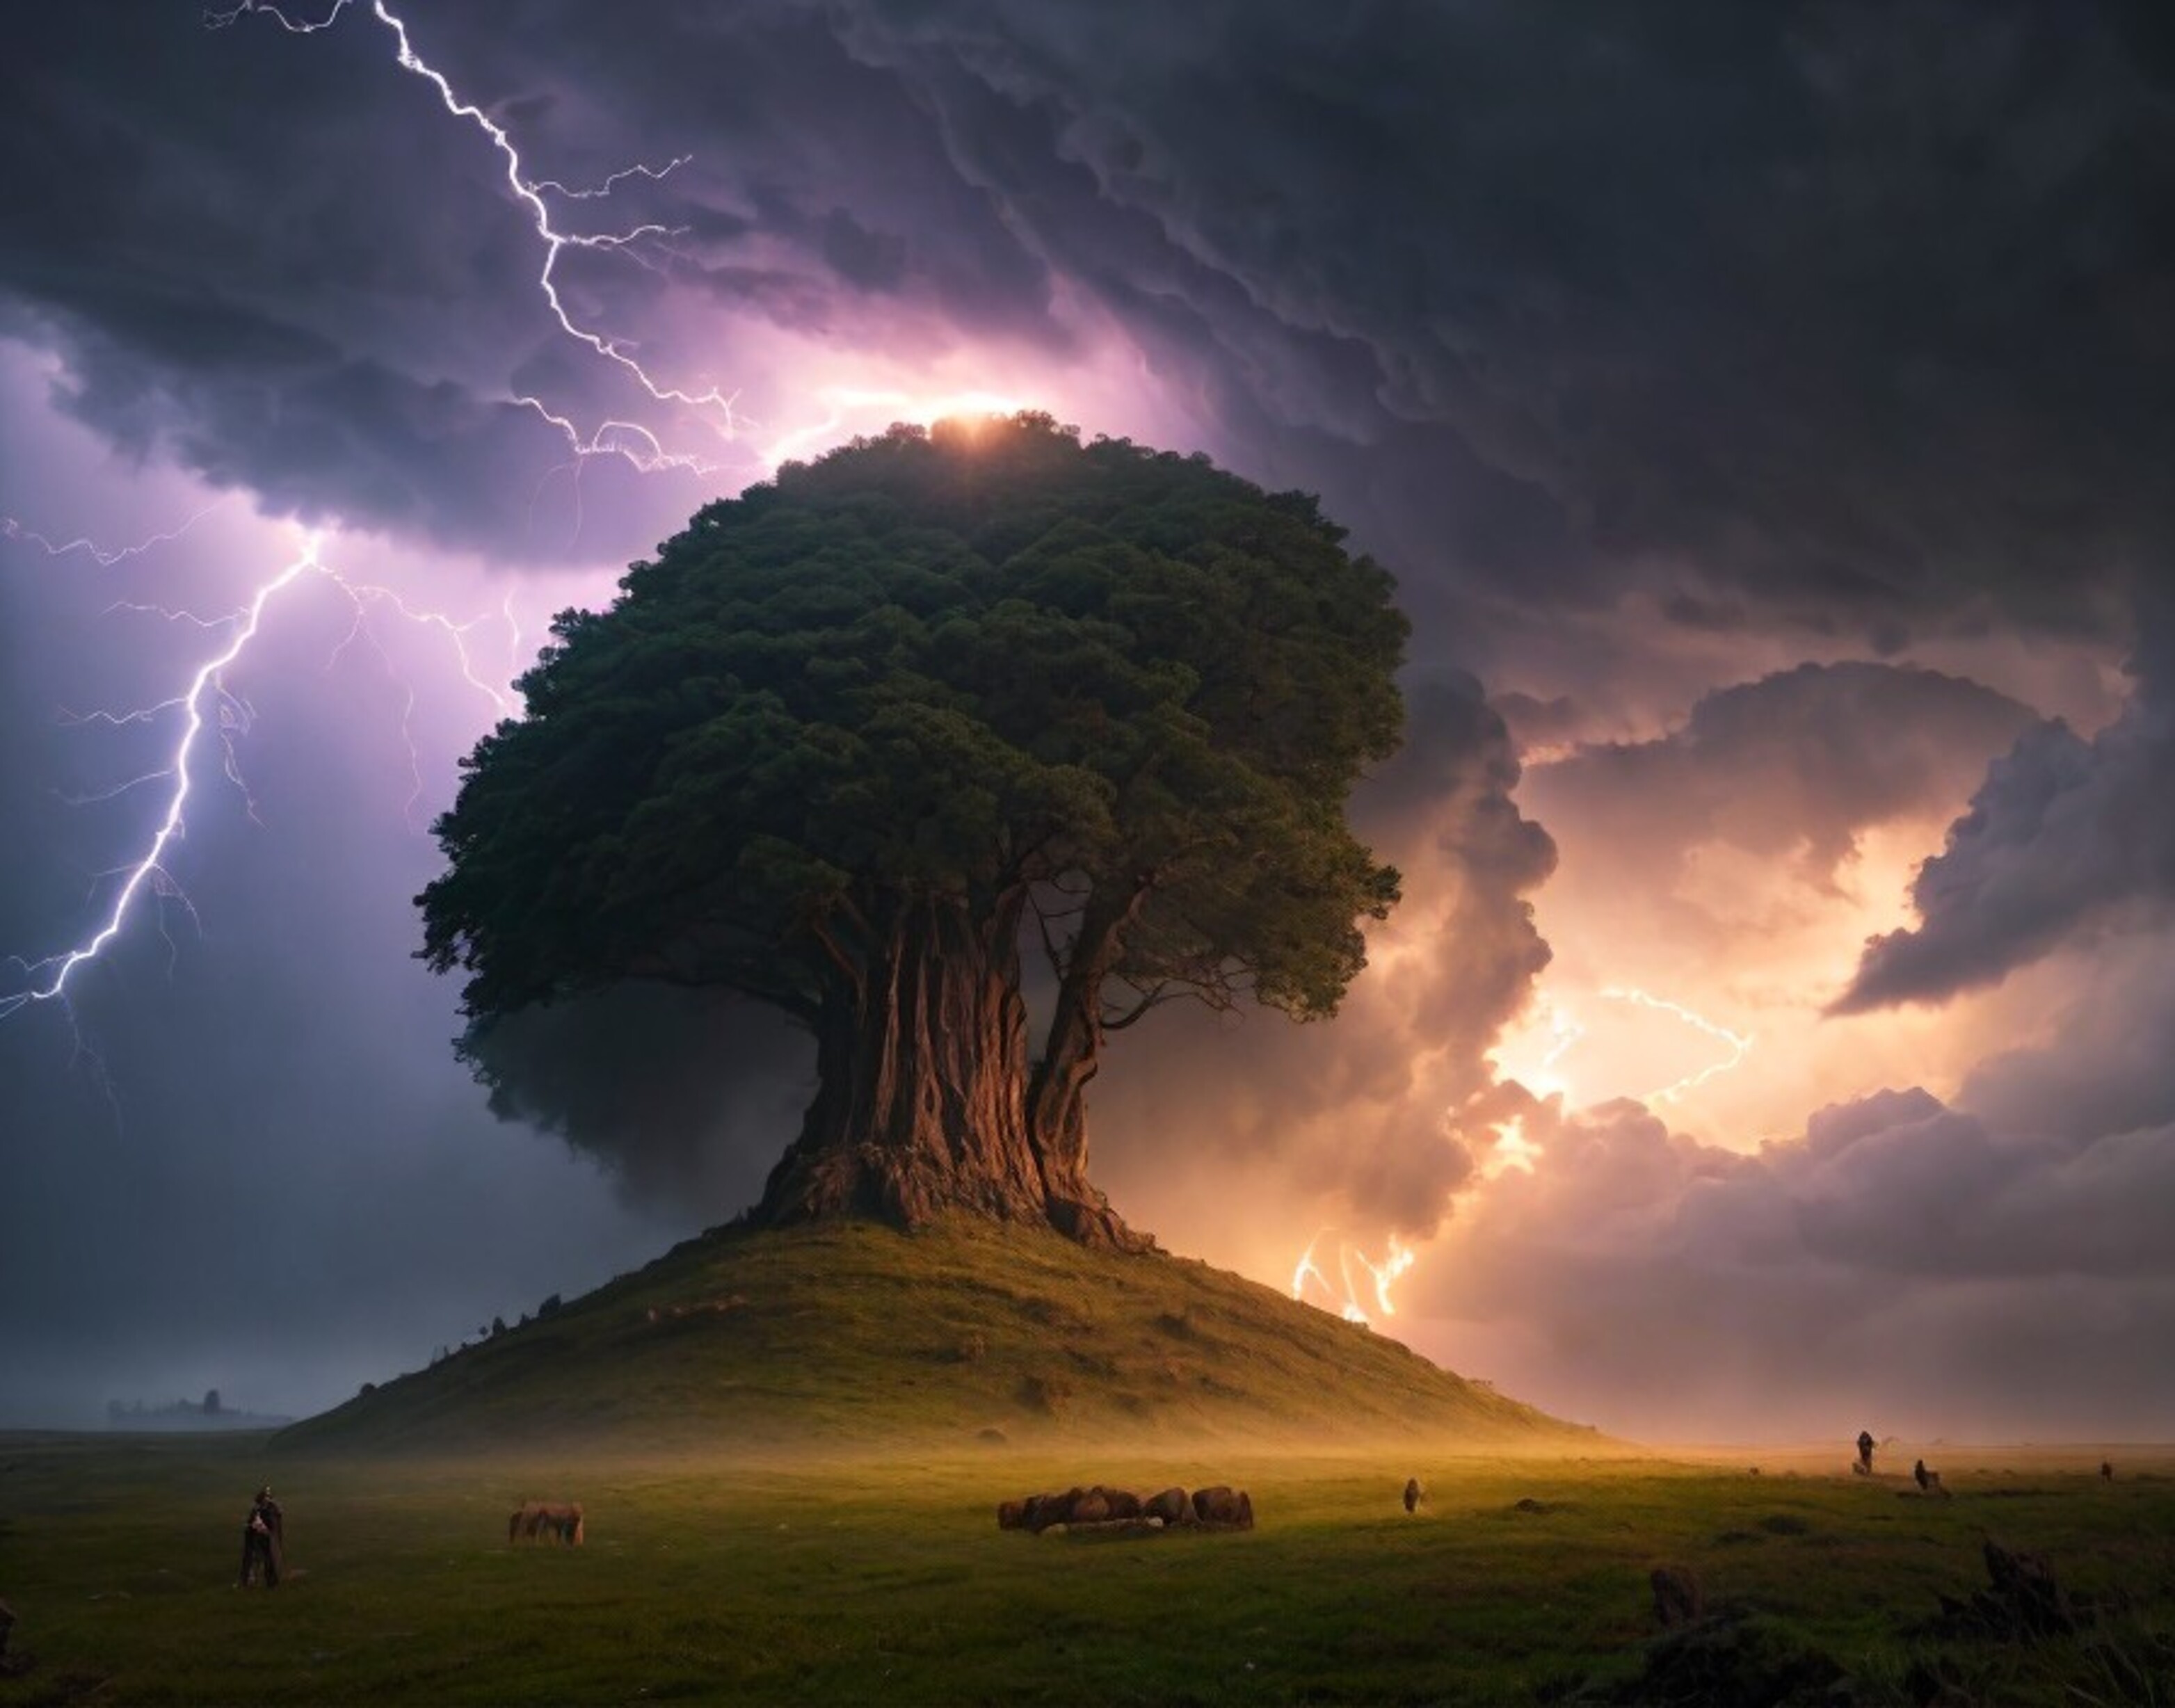 A tree at night and lightning above it